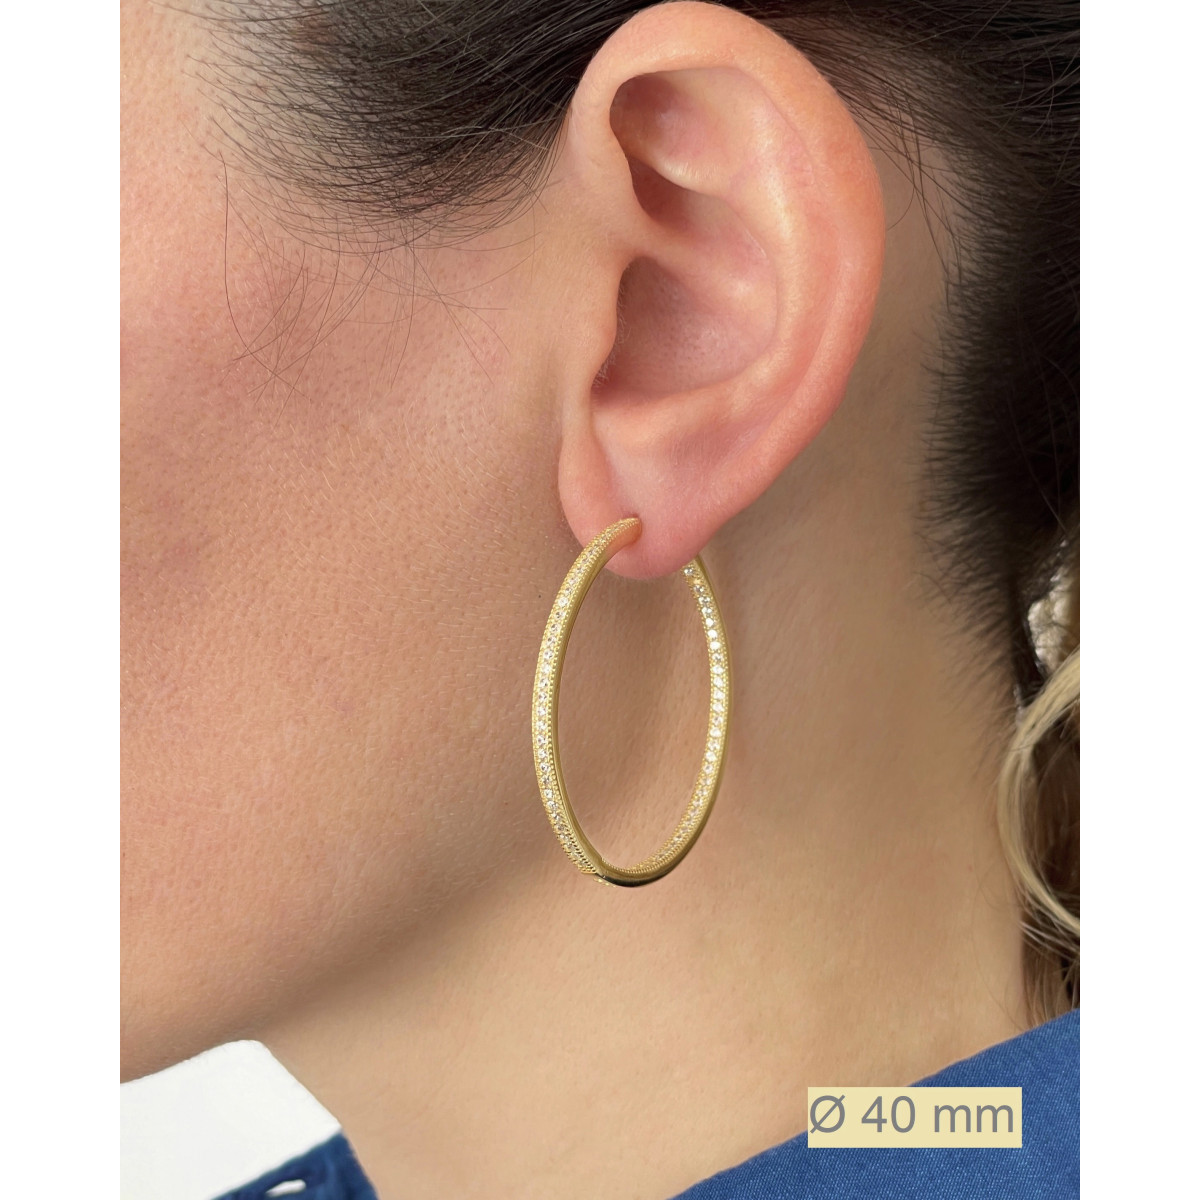 LARGE HOOP EARRINGS WITH WHITE PROFILE